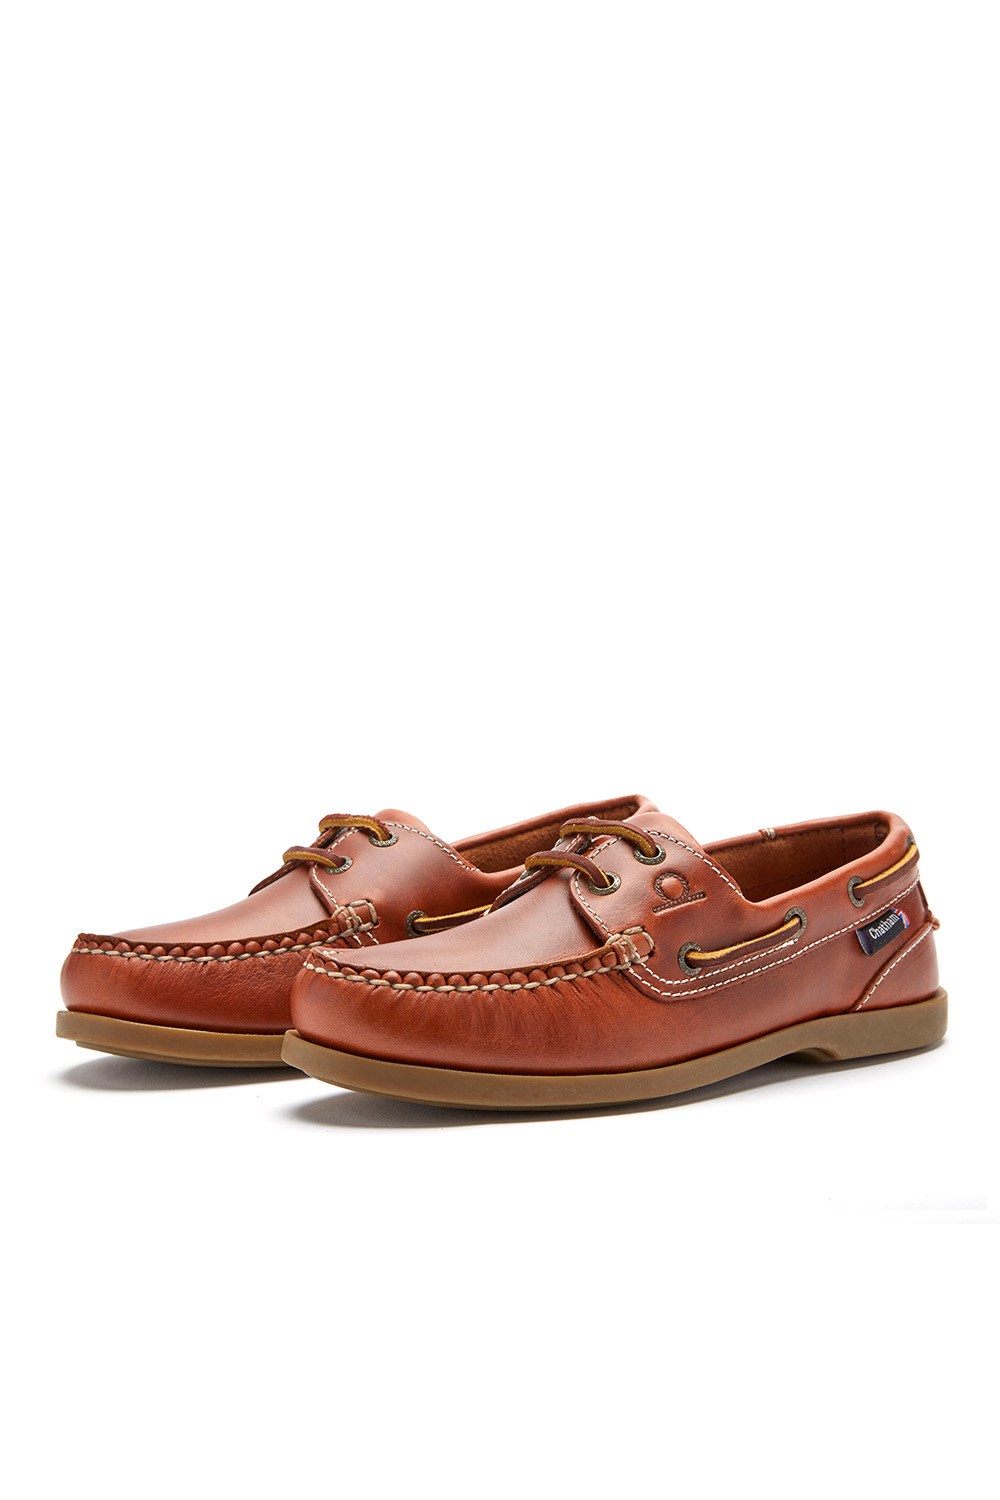 Deck Lady Ii G2 Leather Boat Shoes -